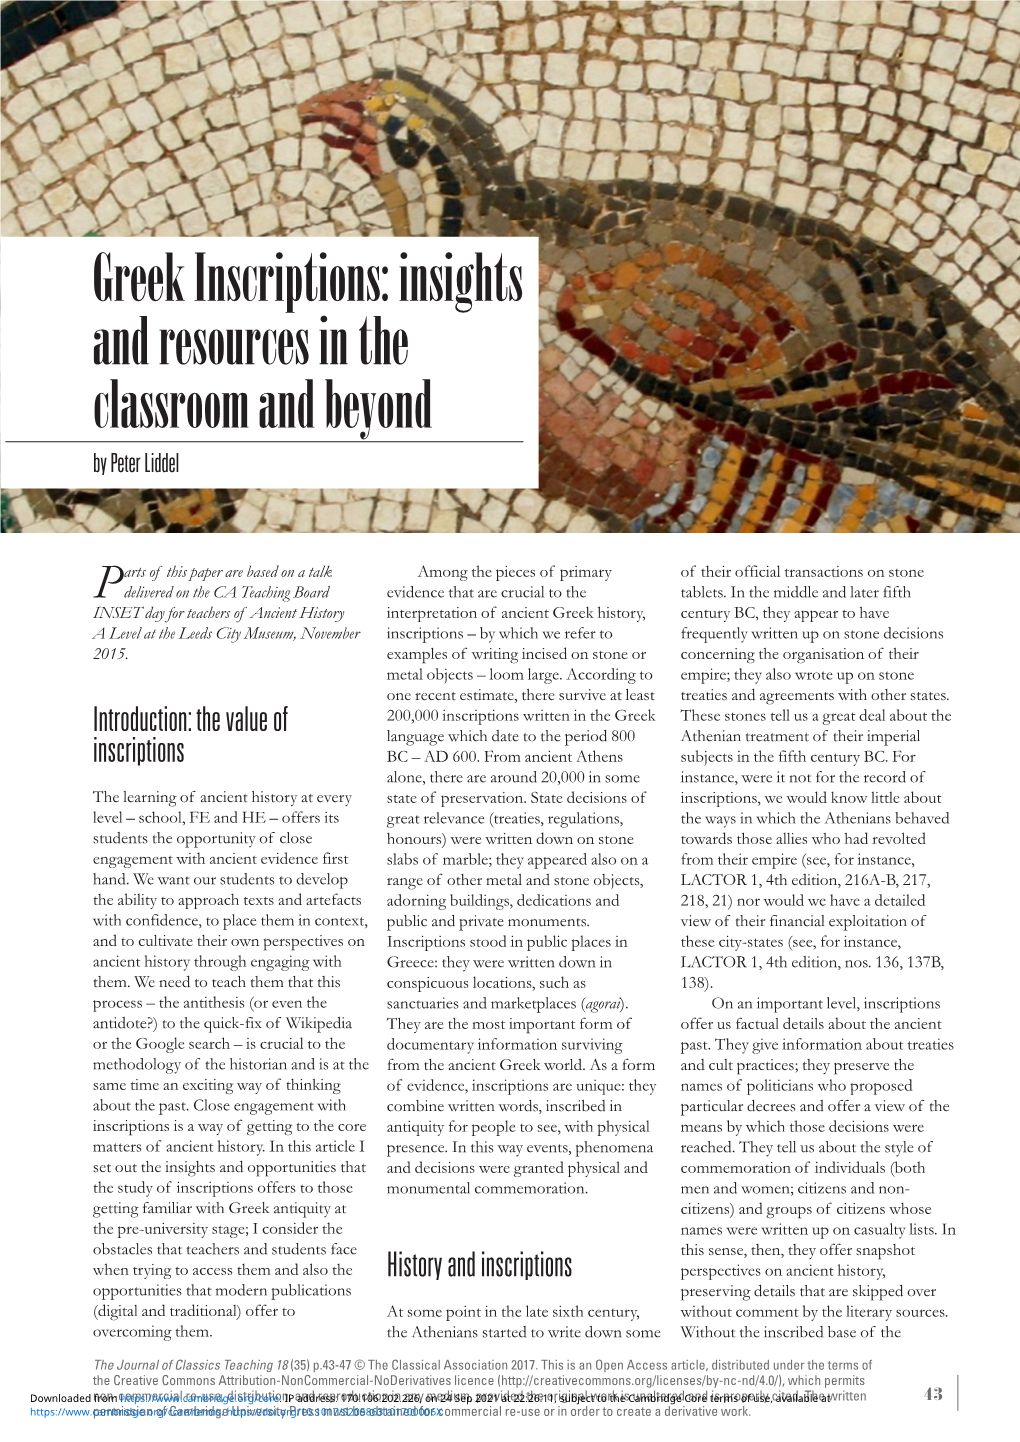 Greek Inscriptions: Insights and Resources in the Classroom and Beyond by Peter Liddel